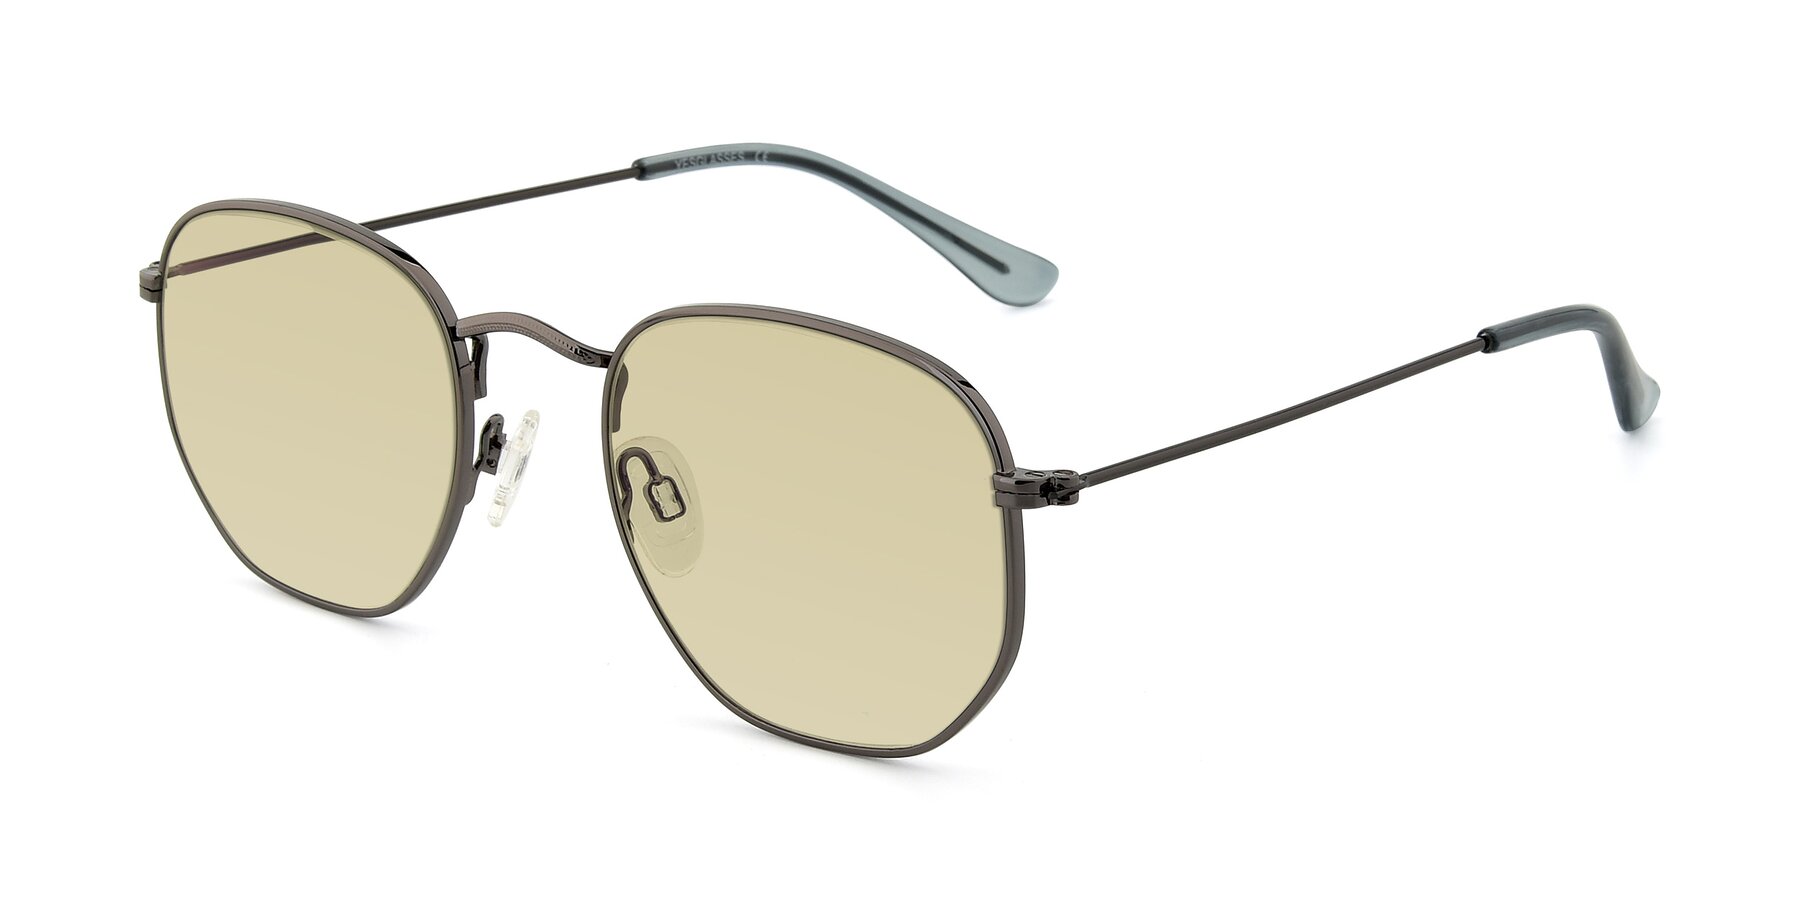 Angle of SSR1944 in Grey with Light Champagne Tinted Lenses